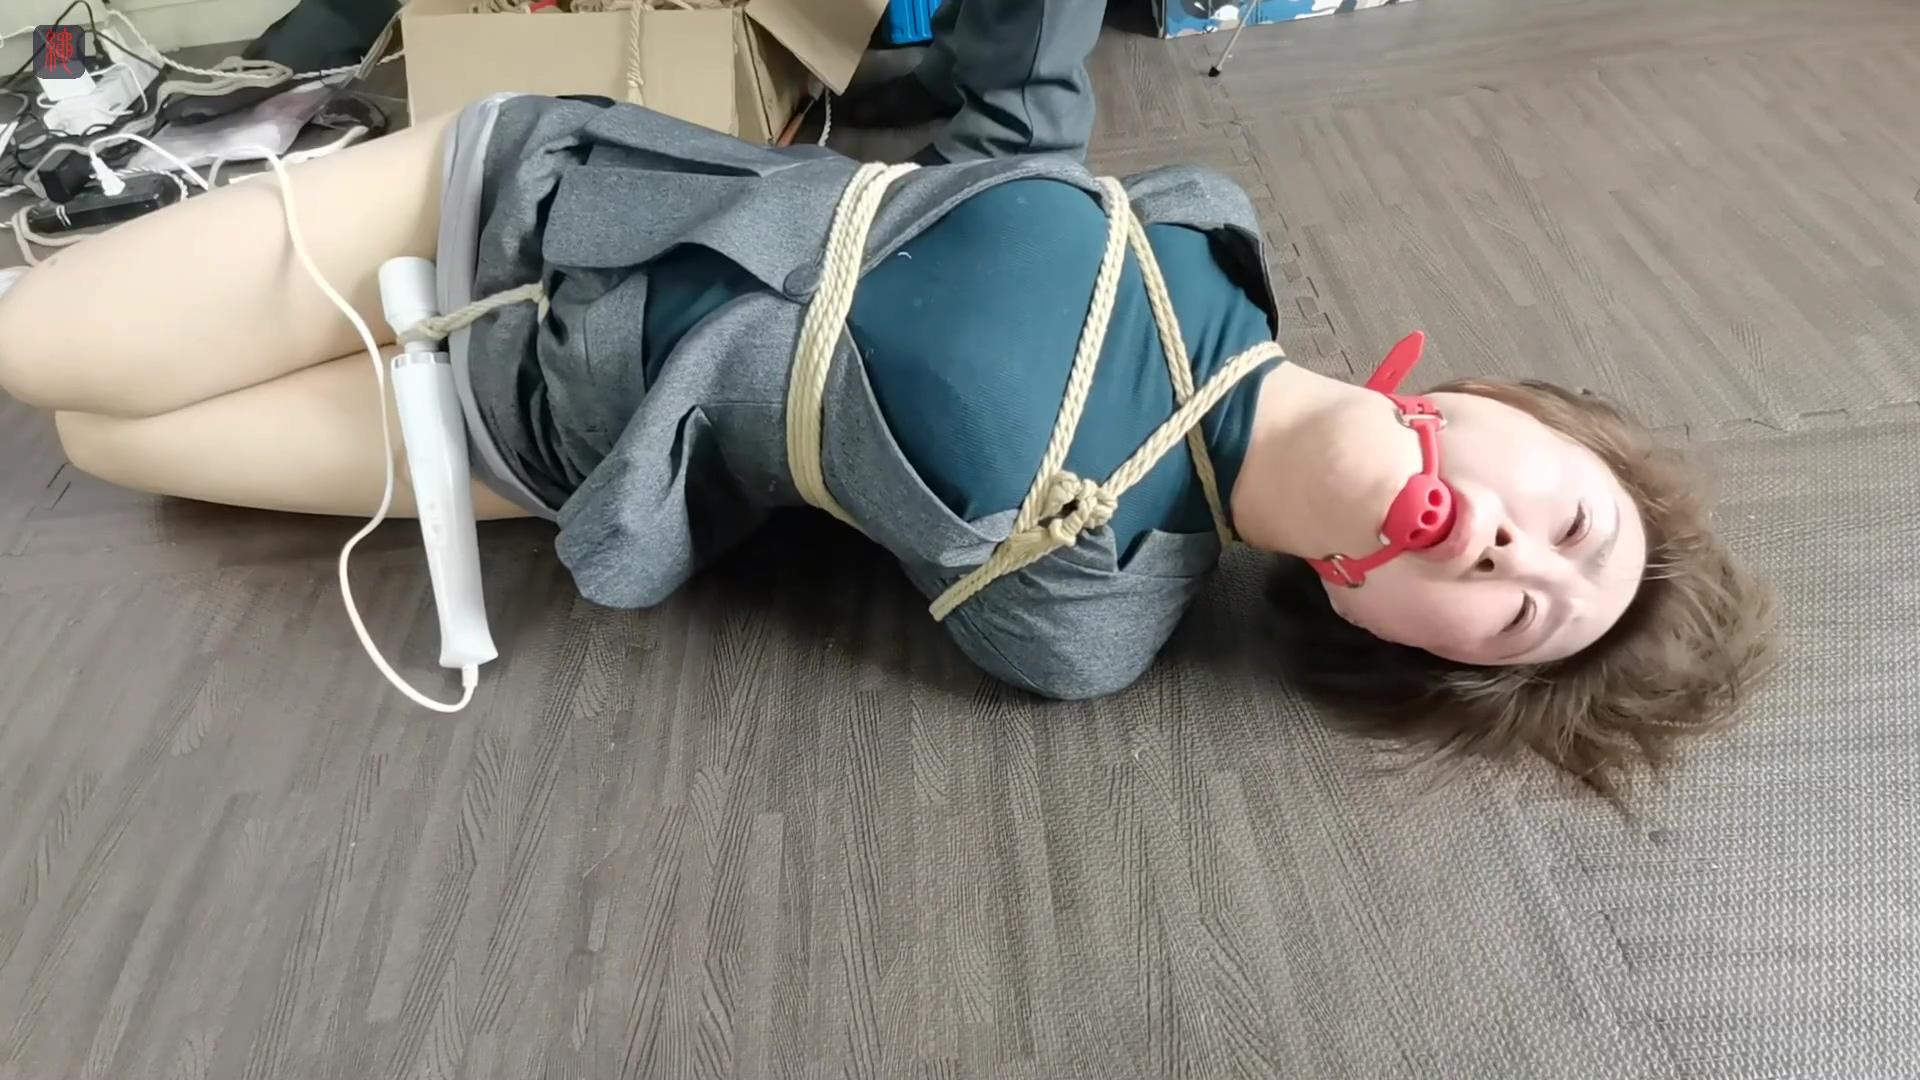 Asian Business Woman Hogtied And Strung Up - 1